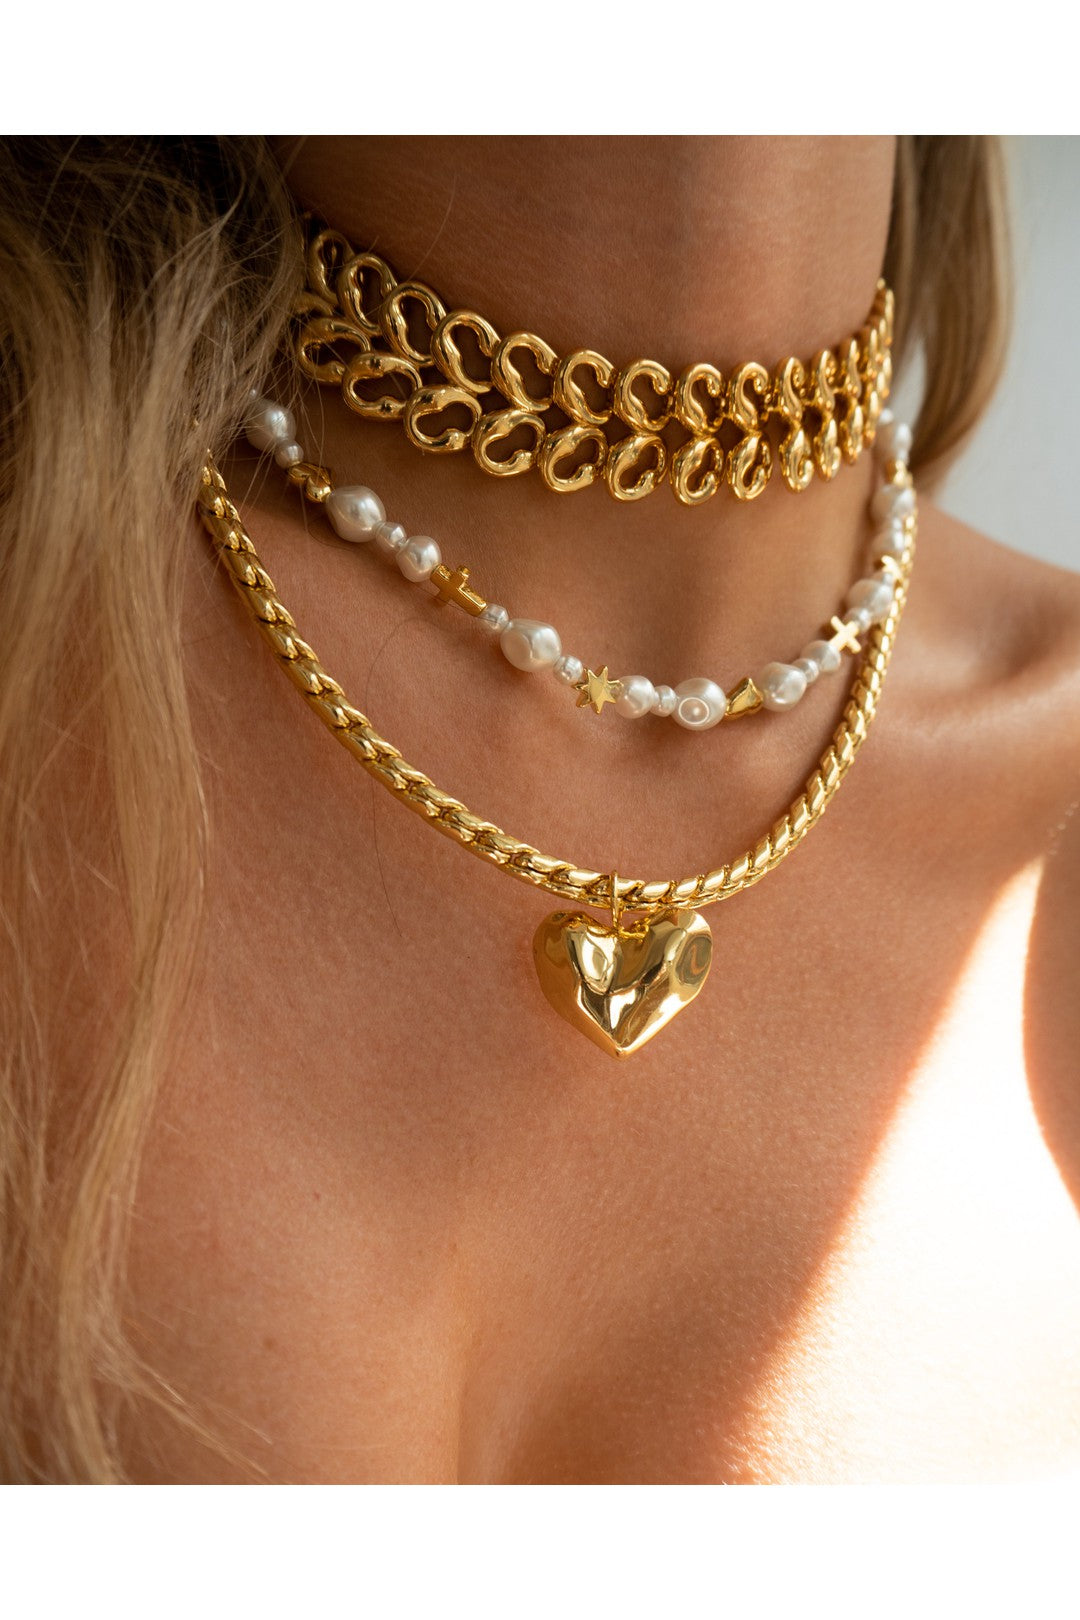 The metal lace choker, gold